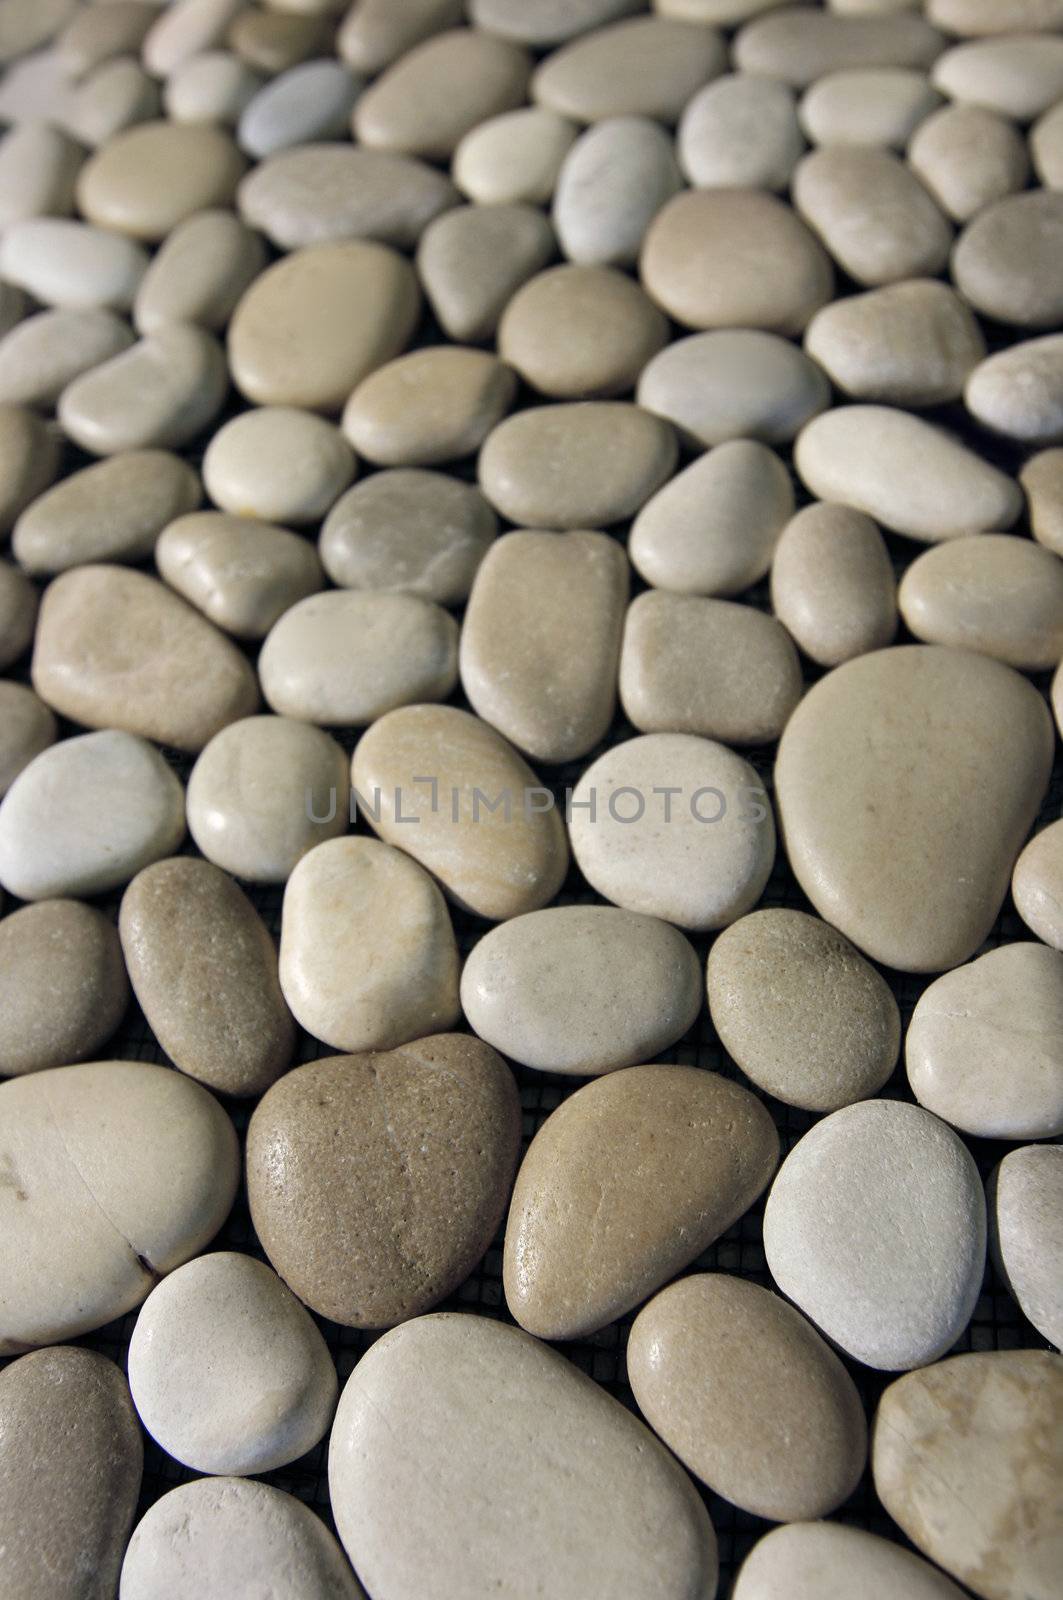 Beautifully shaped pebbles - perfect as a natural background